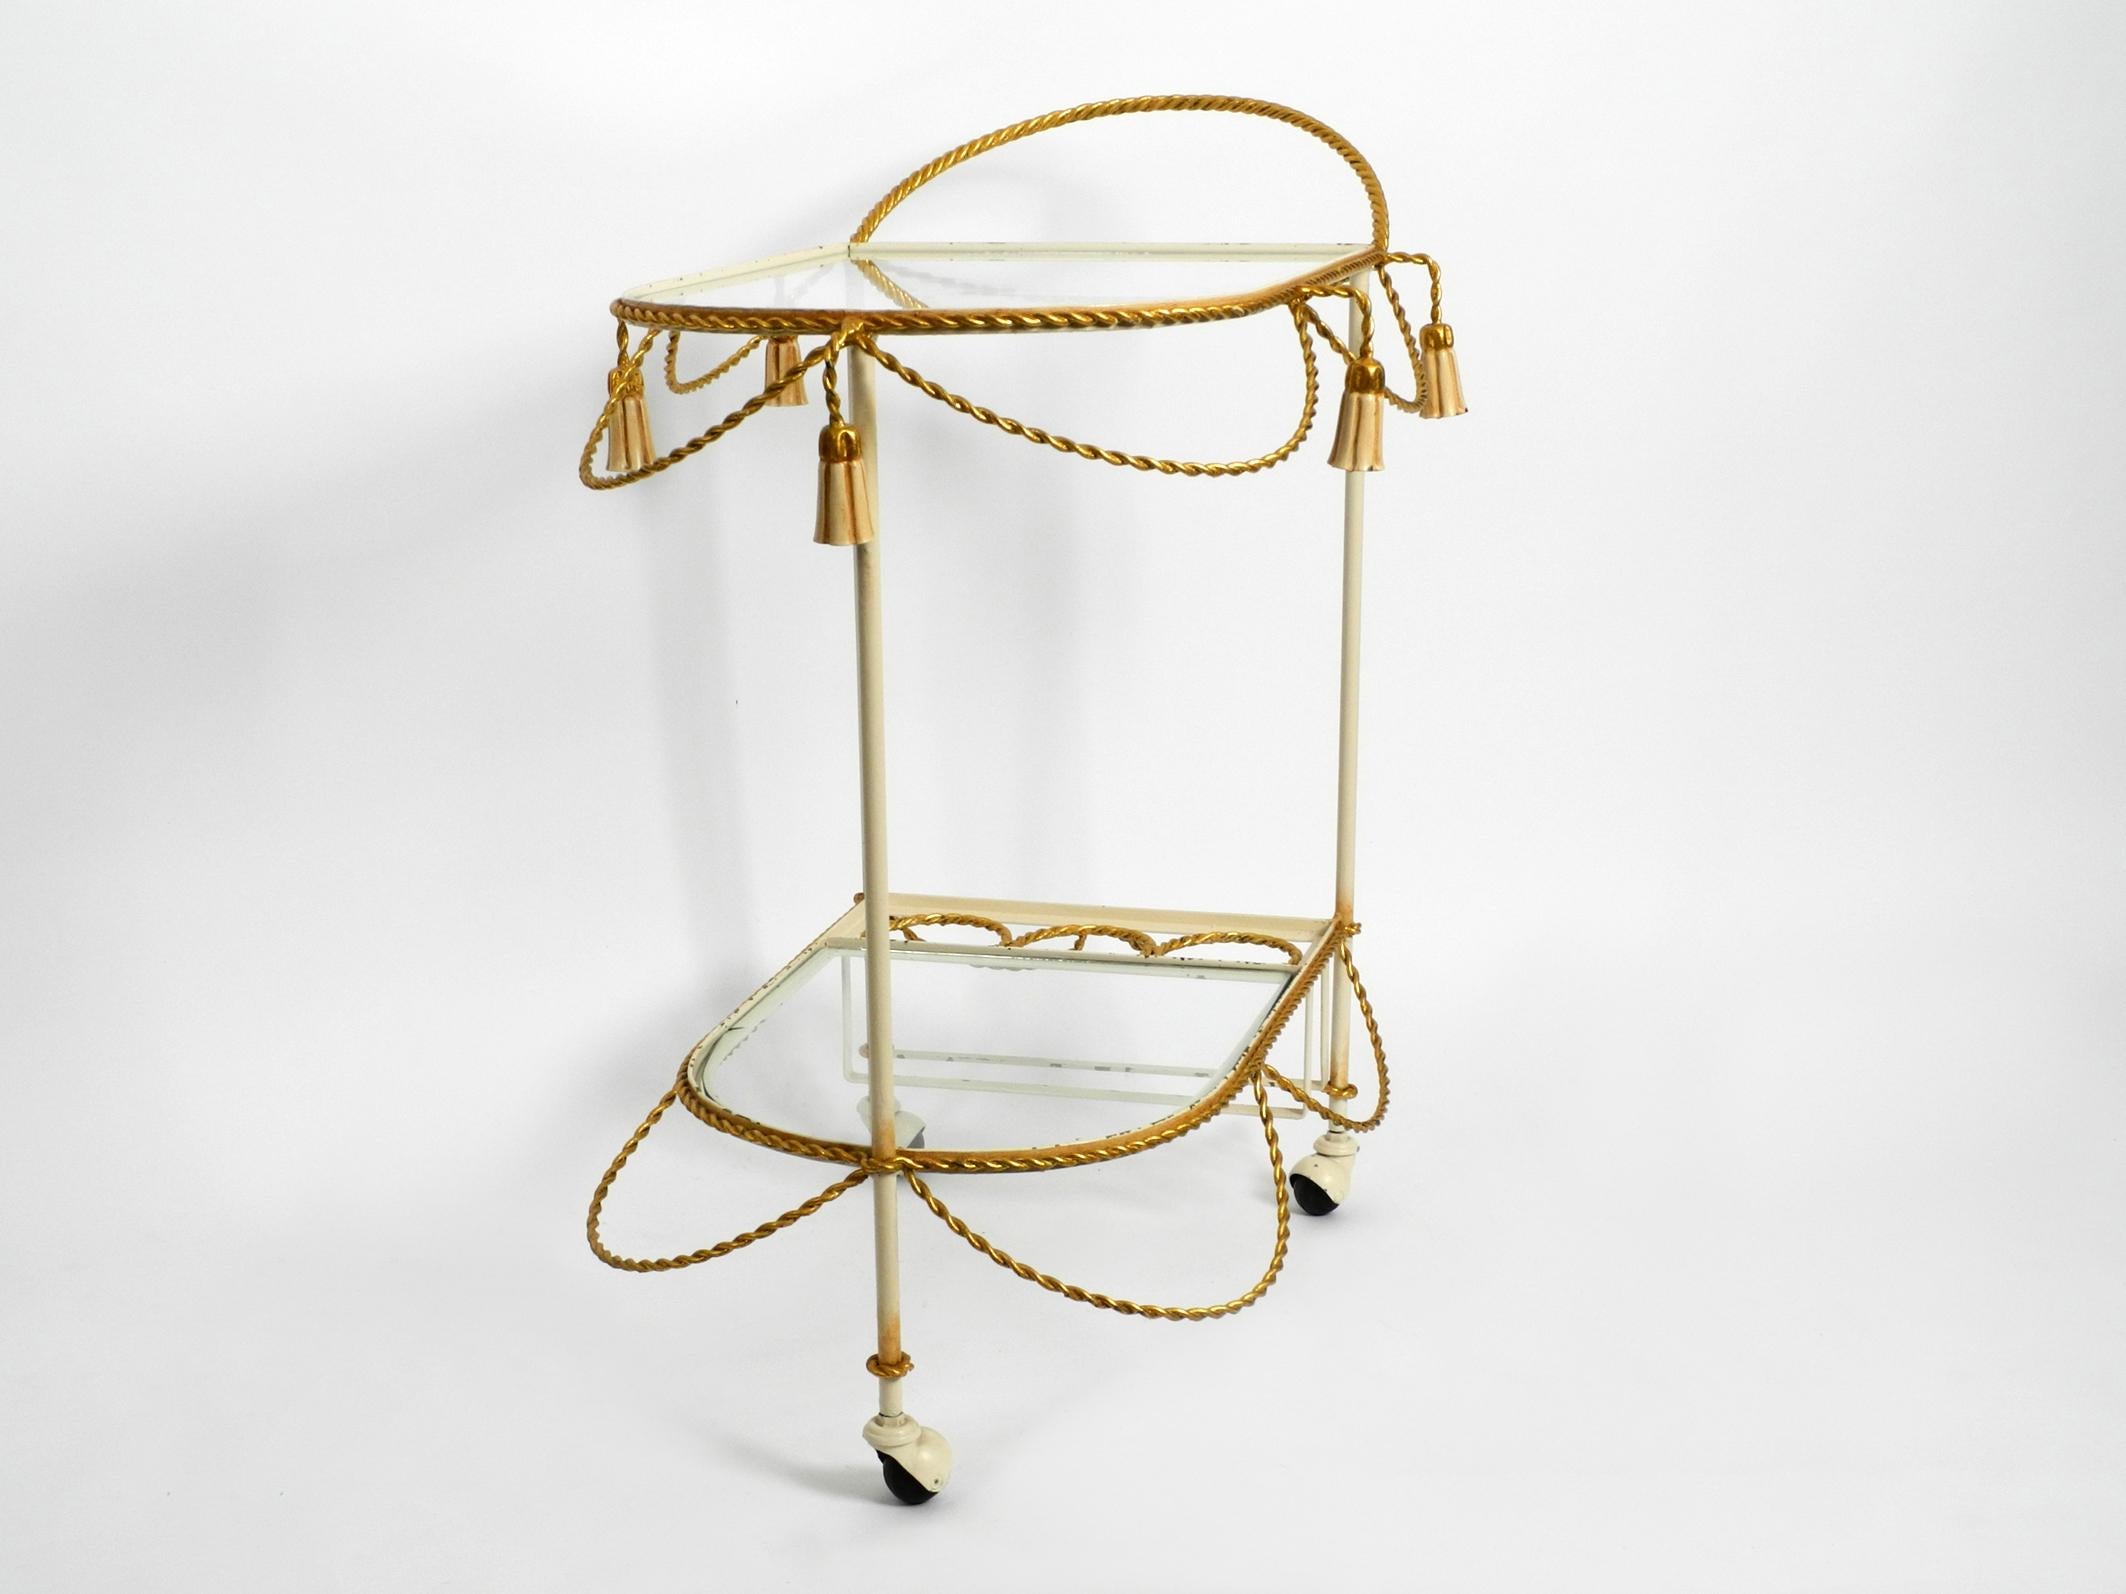 Italian Midcentury Bar Cart Made of Metal in Beige and Gold with Glass Elements In Good Condition For Sale In München, DE